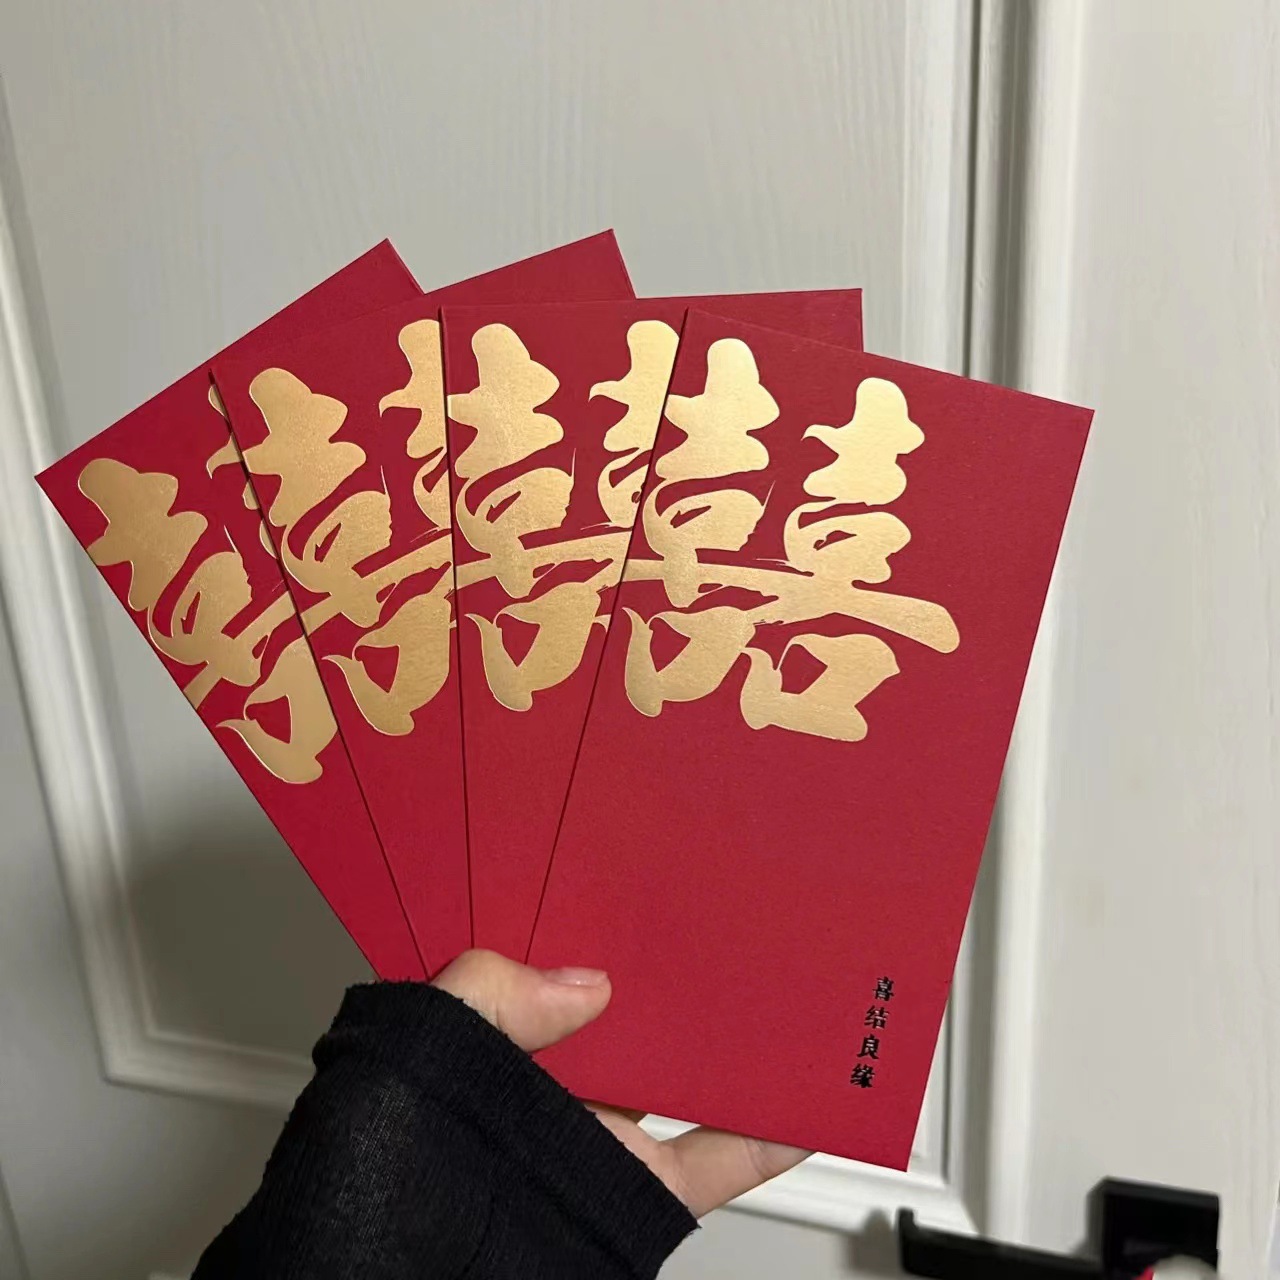 Creative Red Packet Wedding Change Mouth to Pick up Relatives and Block the Door. The Size Is Gilding Xi Decorations New Couple's Ten Thousand Yuan Package Wedding